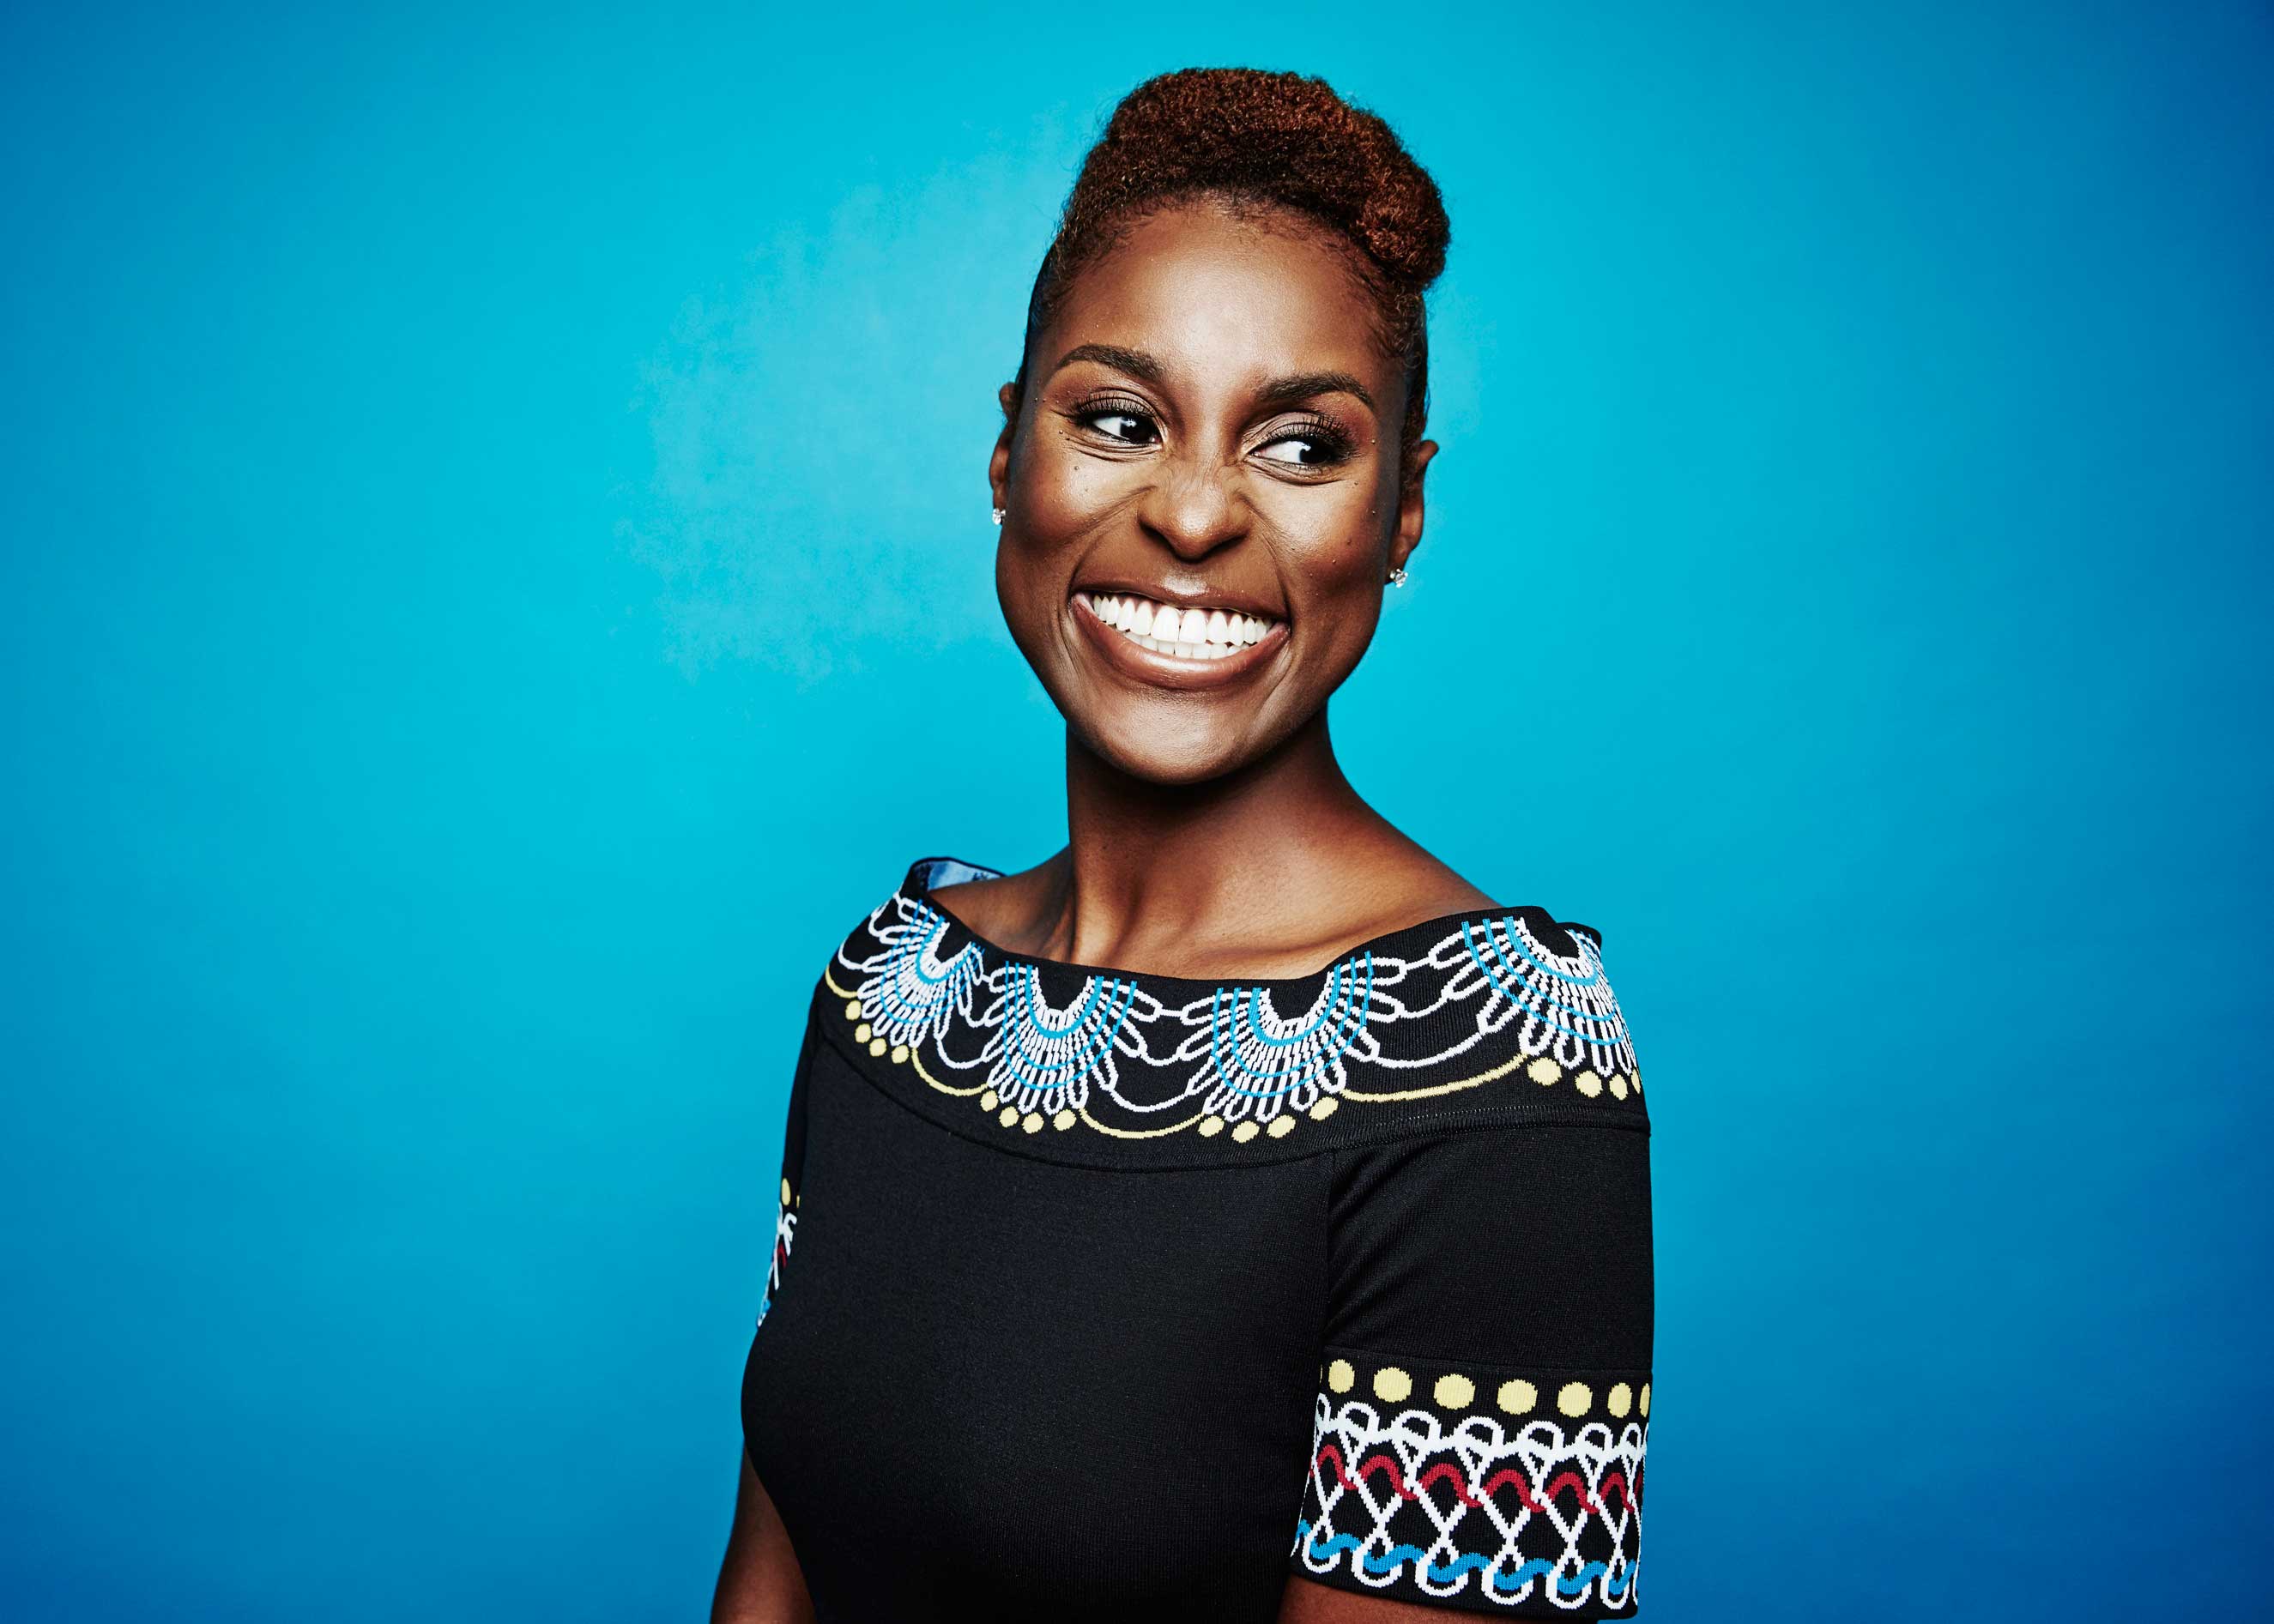 Issa Rae from HBO's 'Insecure' poses for a portrait at the 2016 Summer TCAs Getty Images Portrait Studio at the Beverly Hilton Hotel on July 27th, 2016 in Beverly Hills, California (Maarten de Boer—Getty Images)